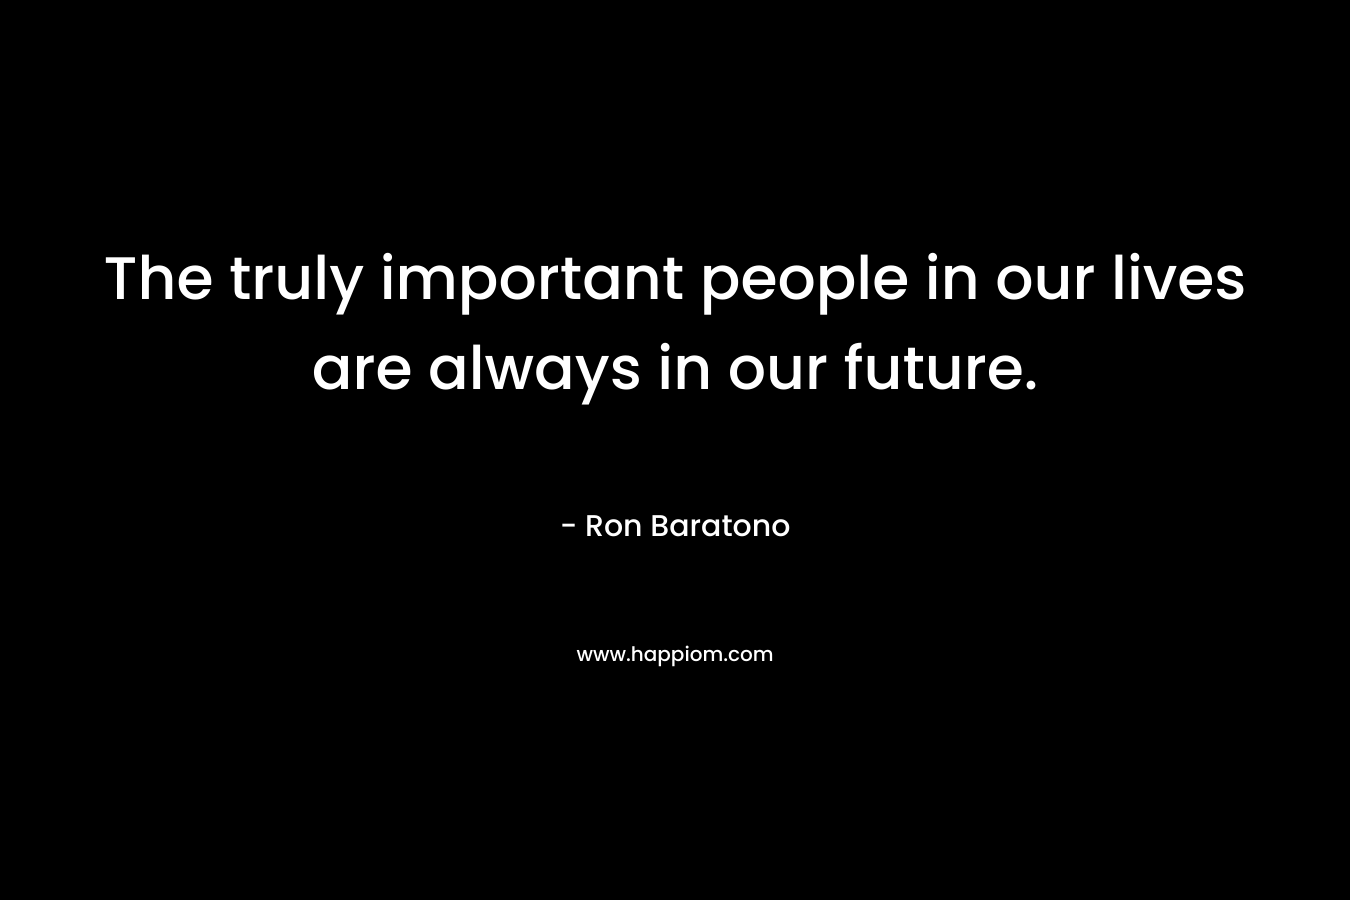 The truly important people in our lives are always in our future.